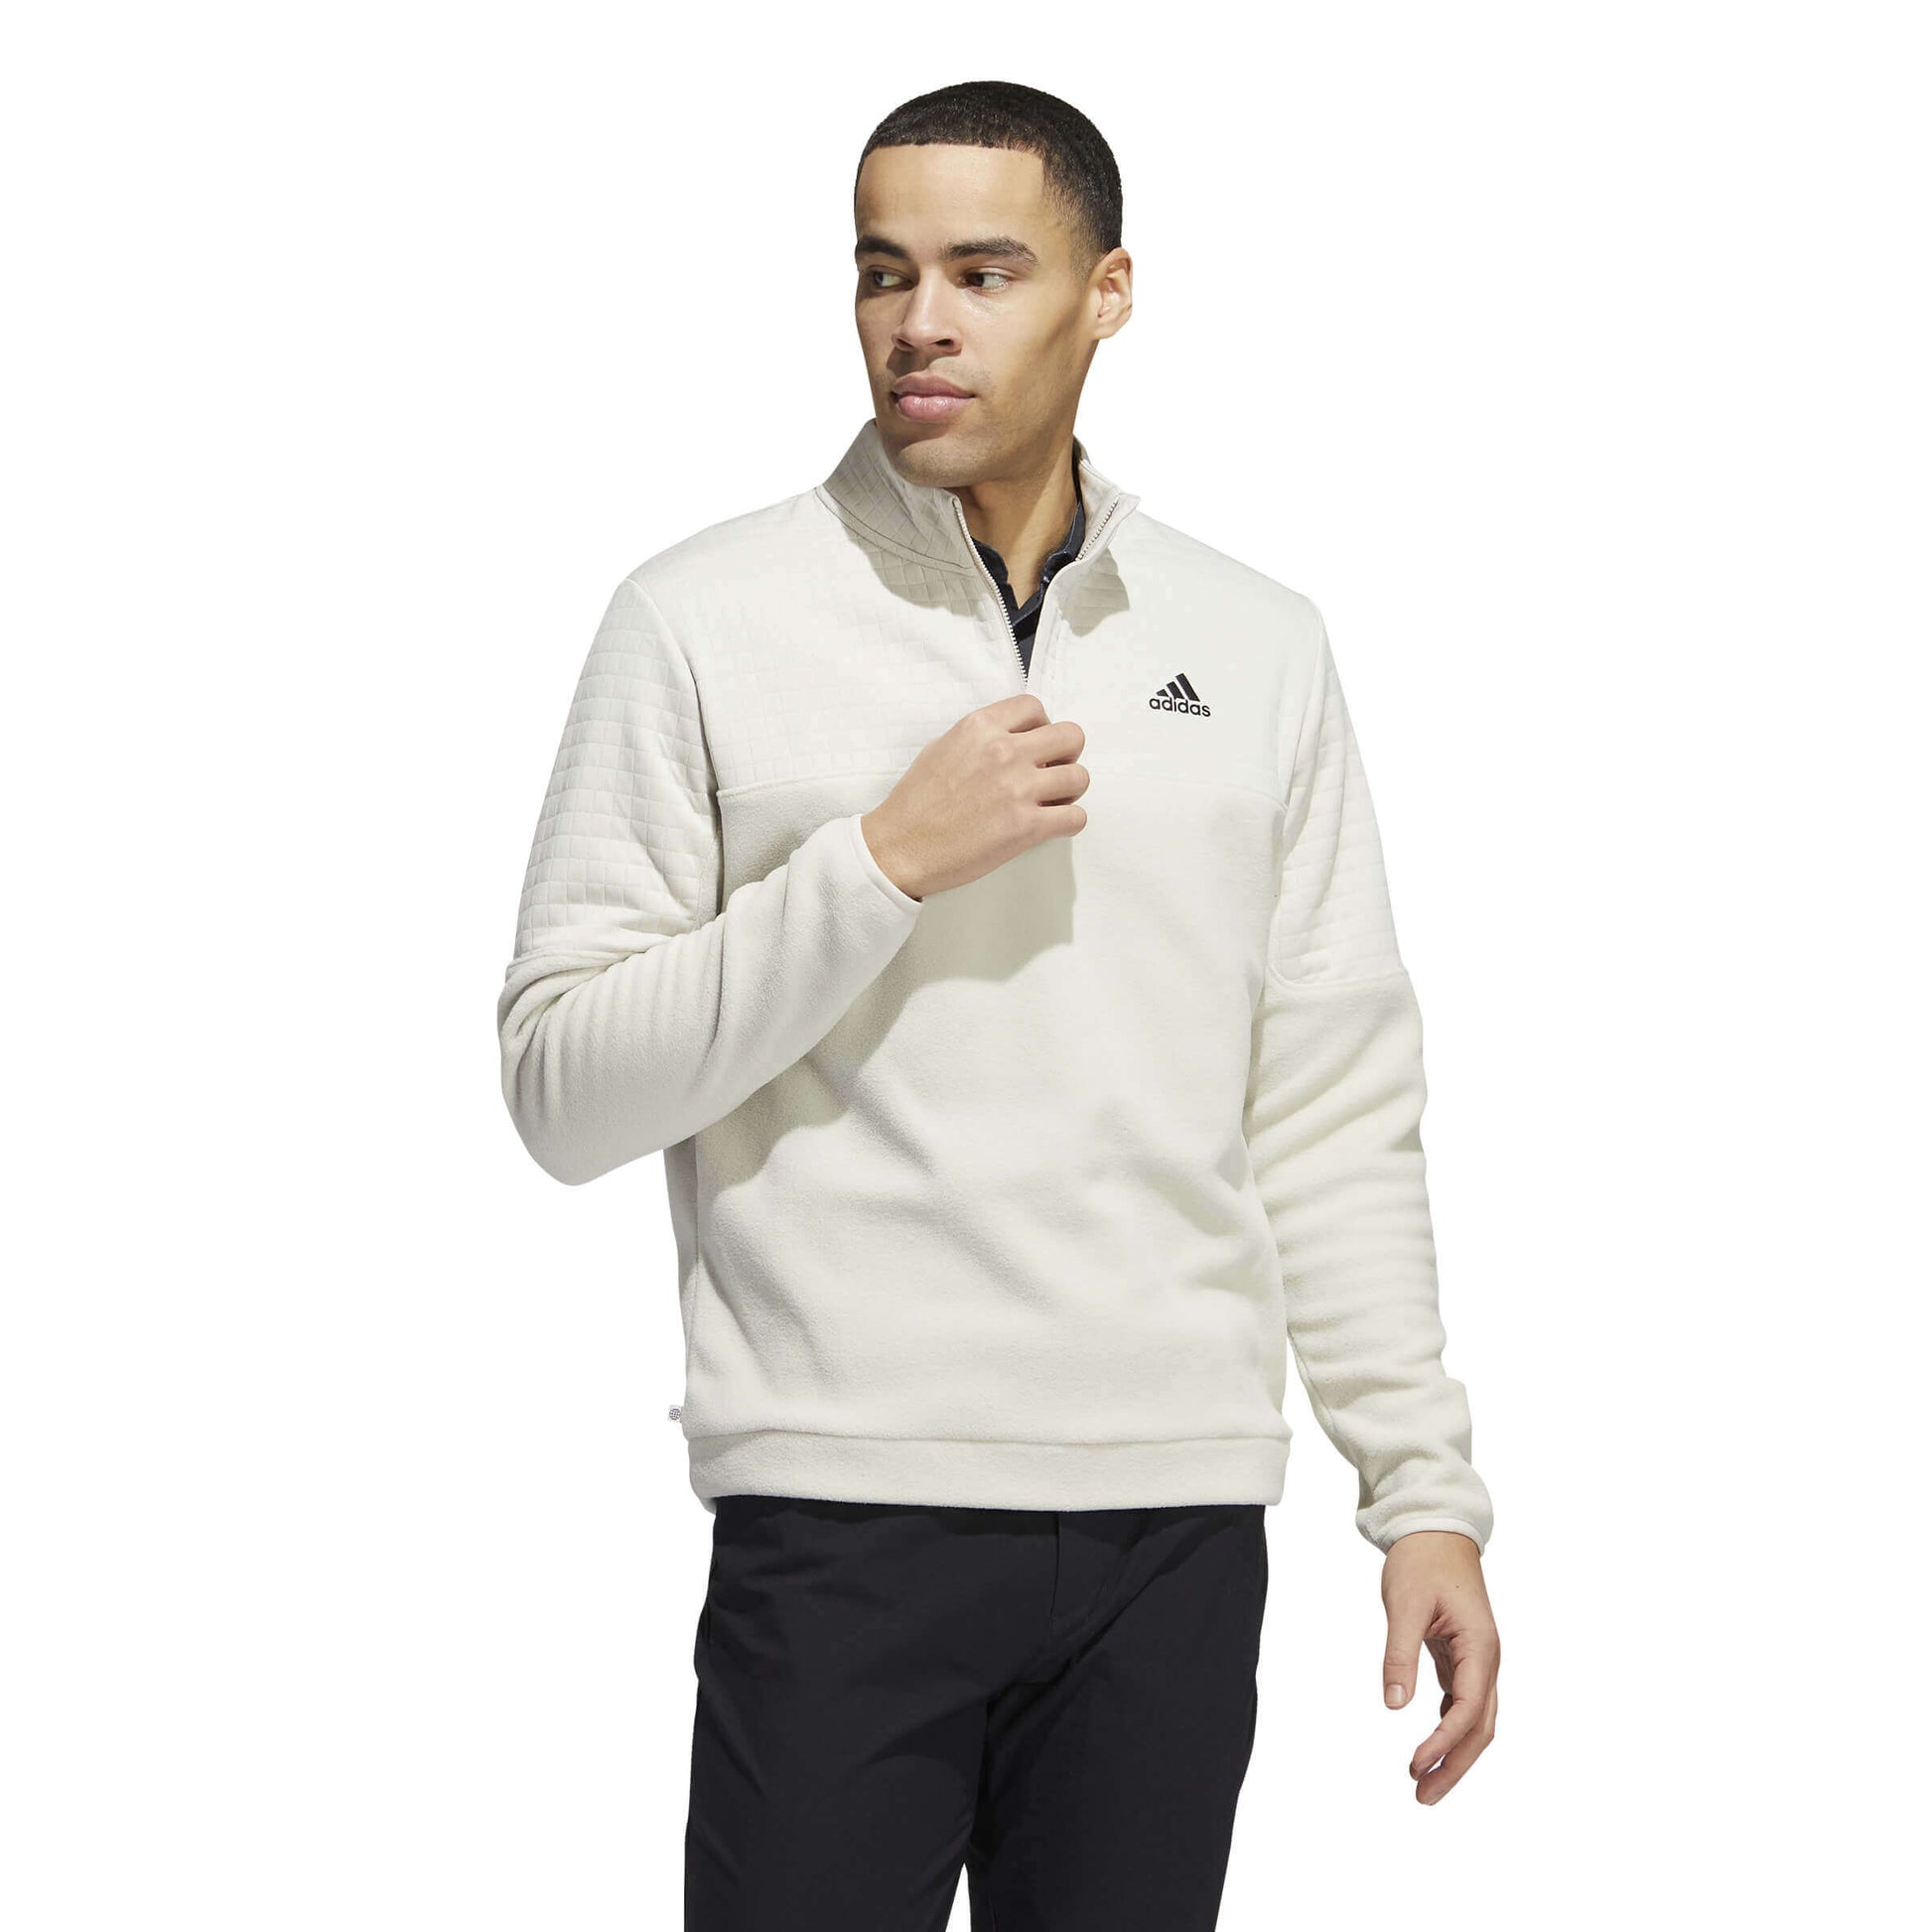  View details for Adidas DWR 1/4 Zip - Clear Brown Adidas DWR 1/4 Zip - Clear Brown